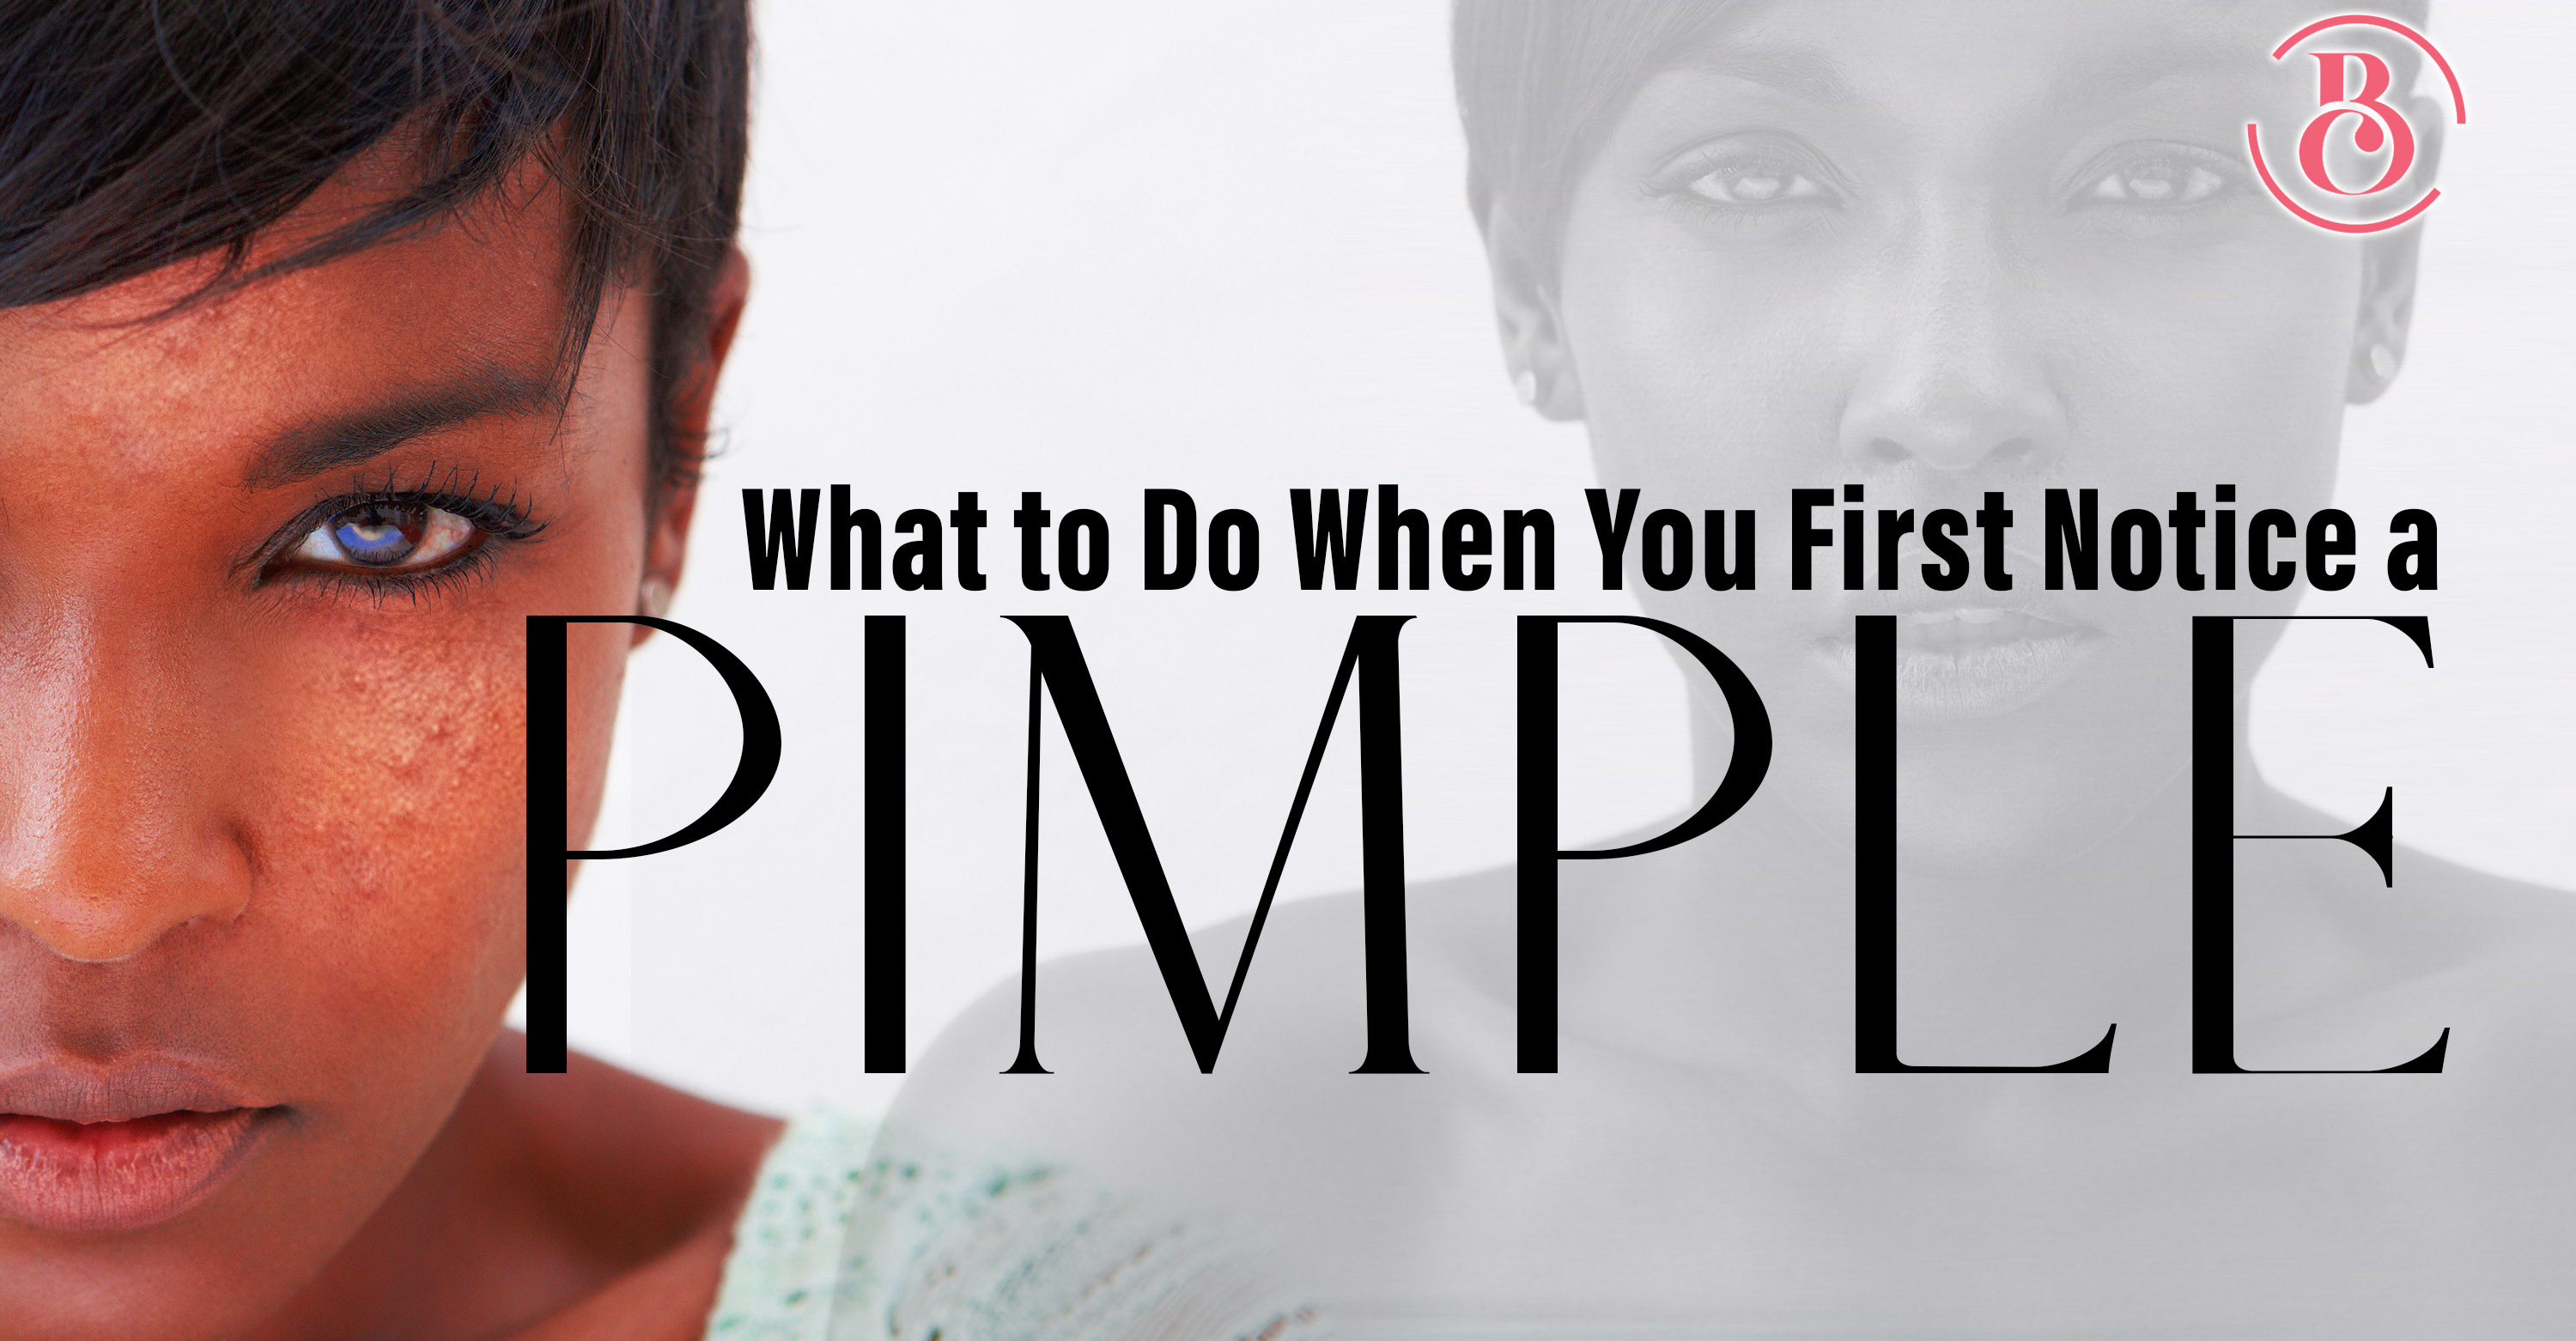 What to Do When You First Notice a Pimple